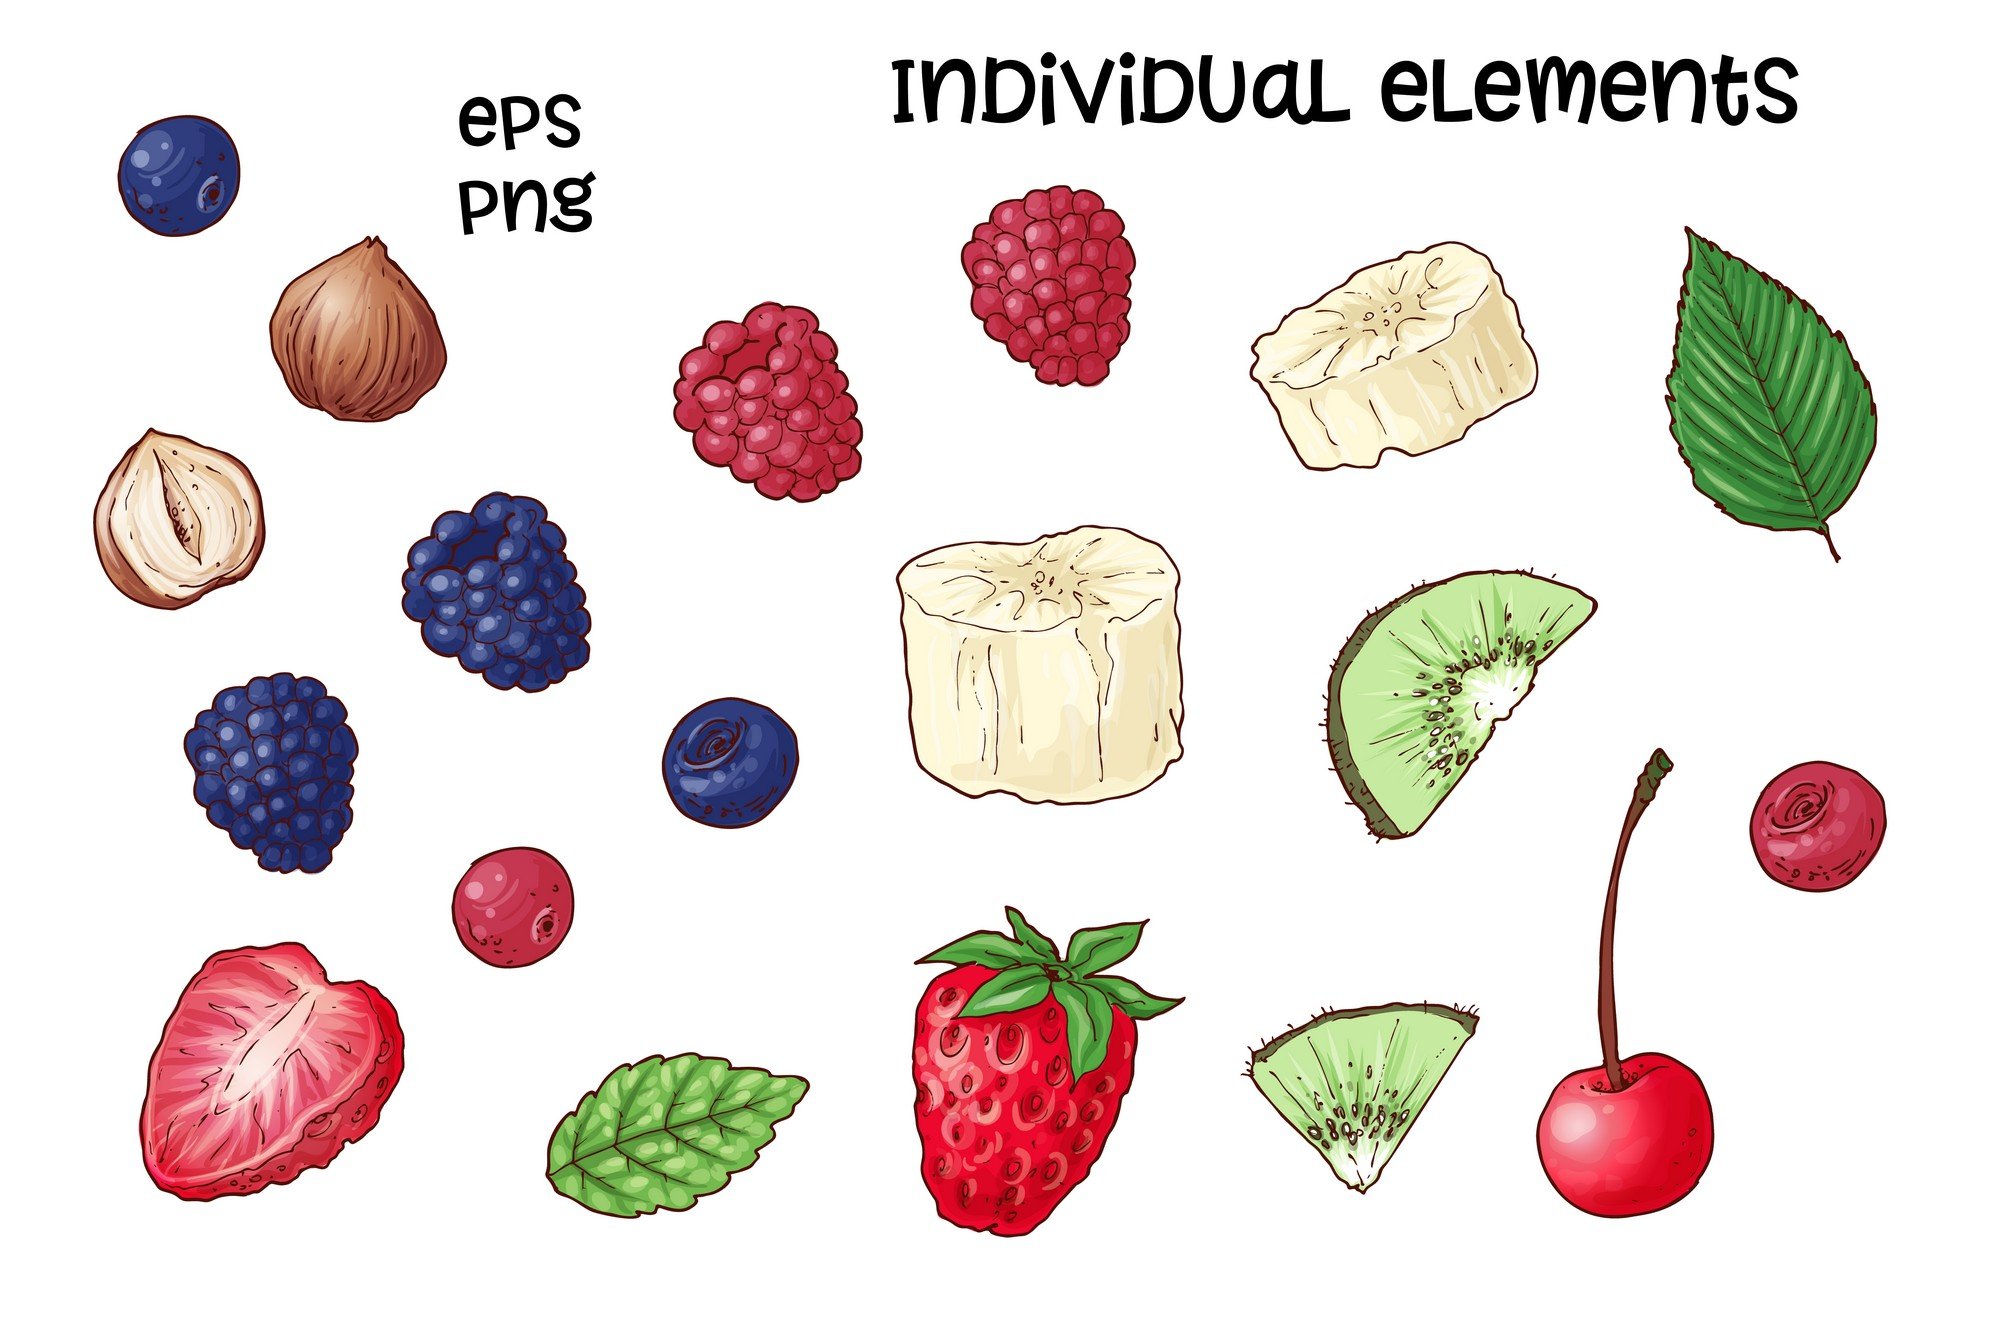 Individual elements of fruits.